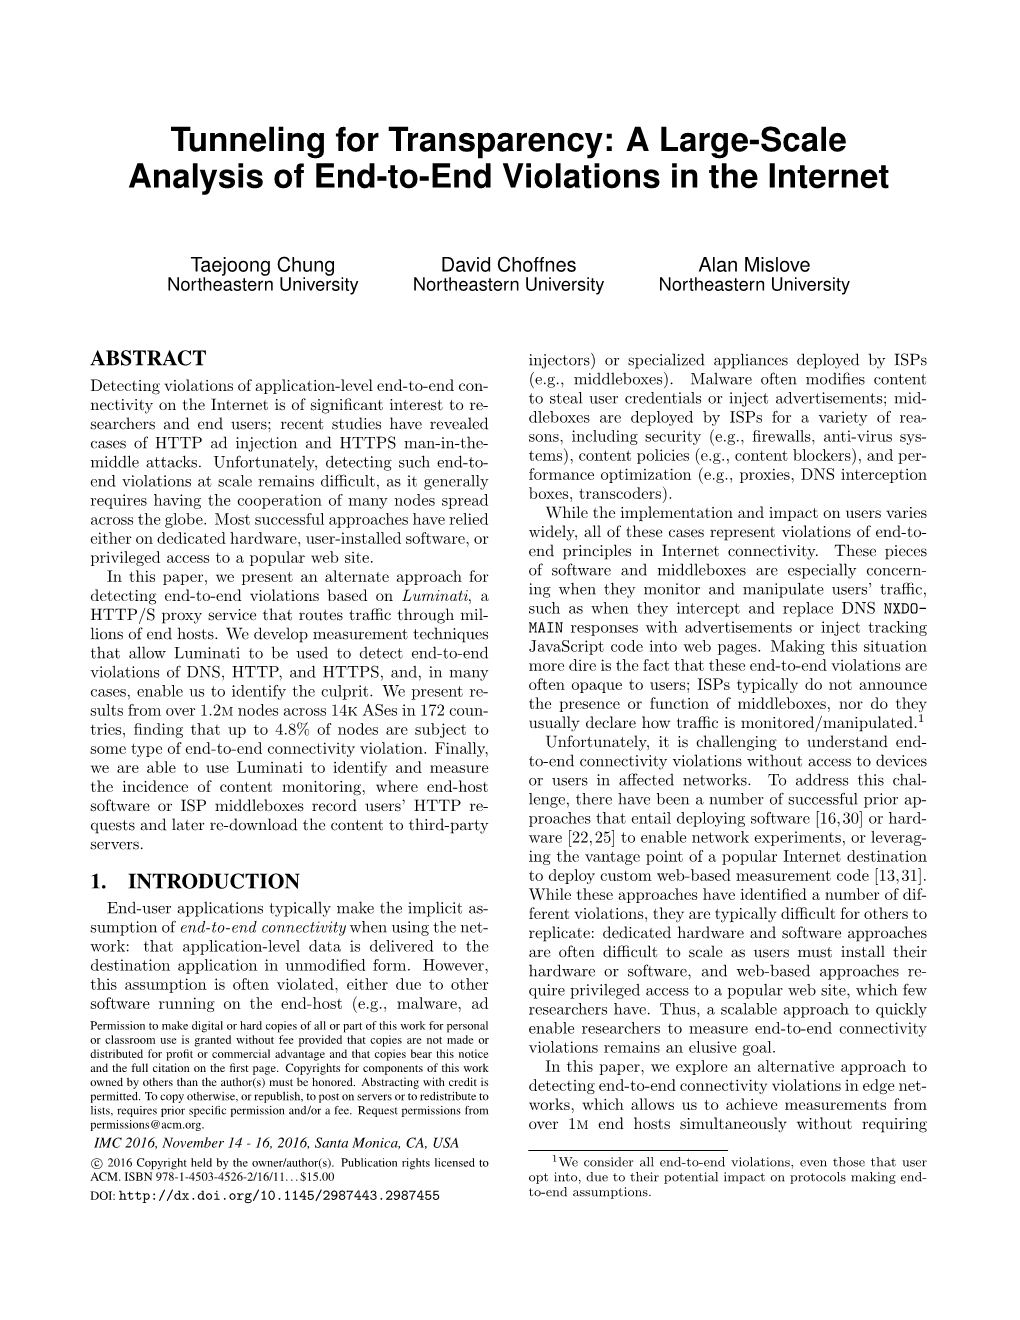 A Large-Scale Analysis of End-To-End Violations in the Internet